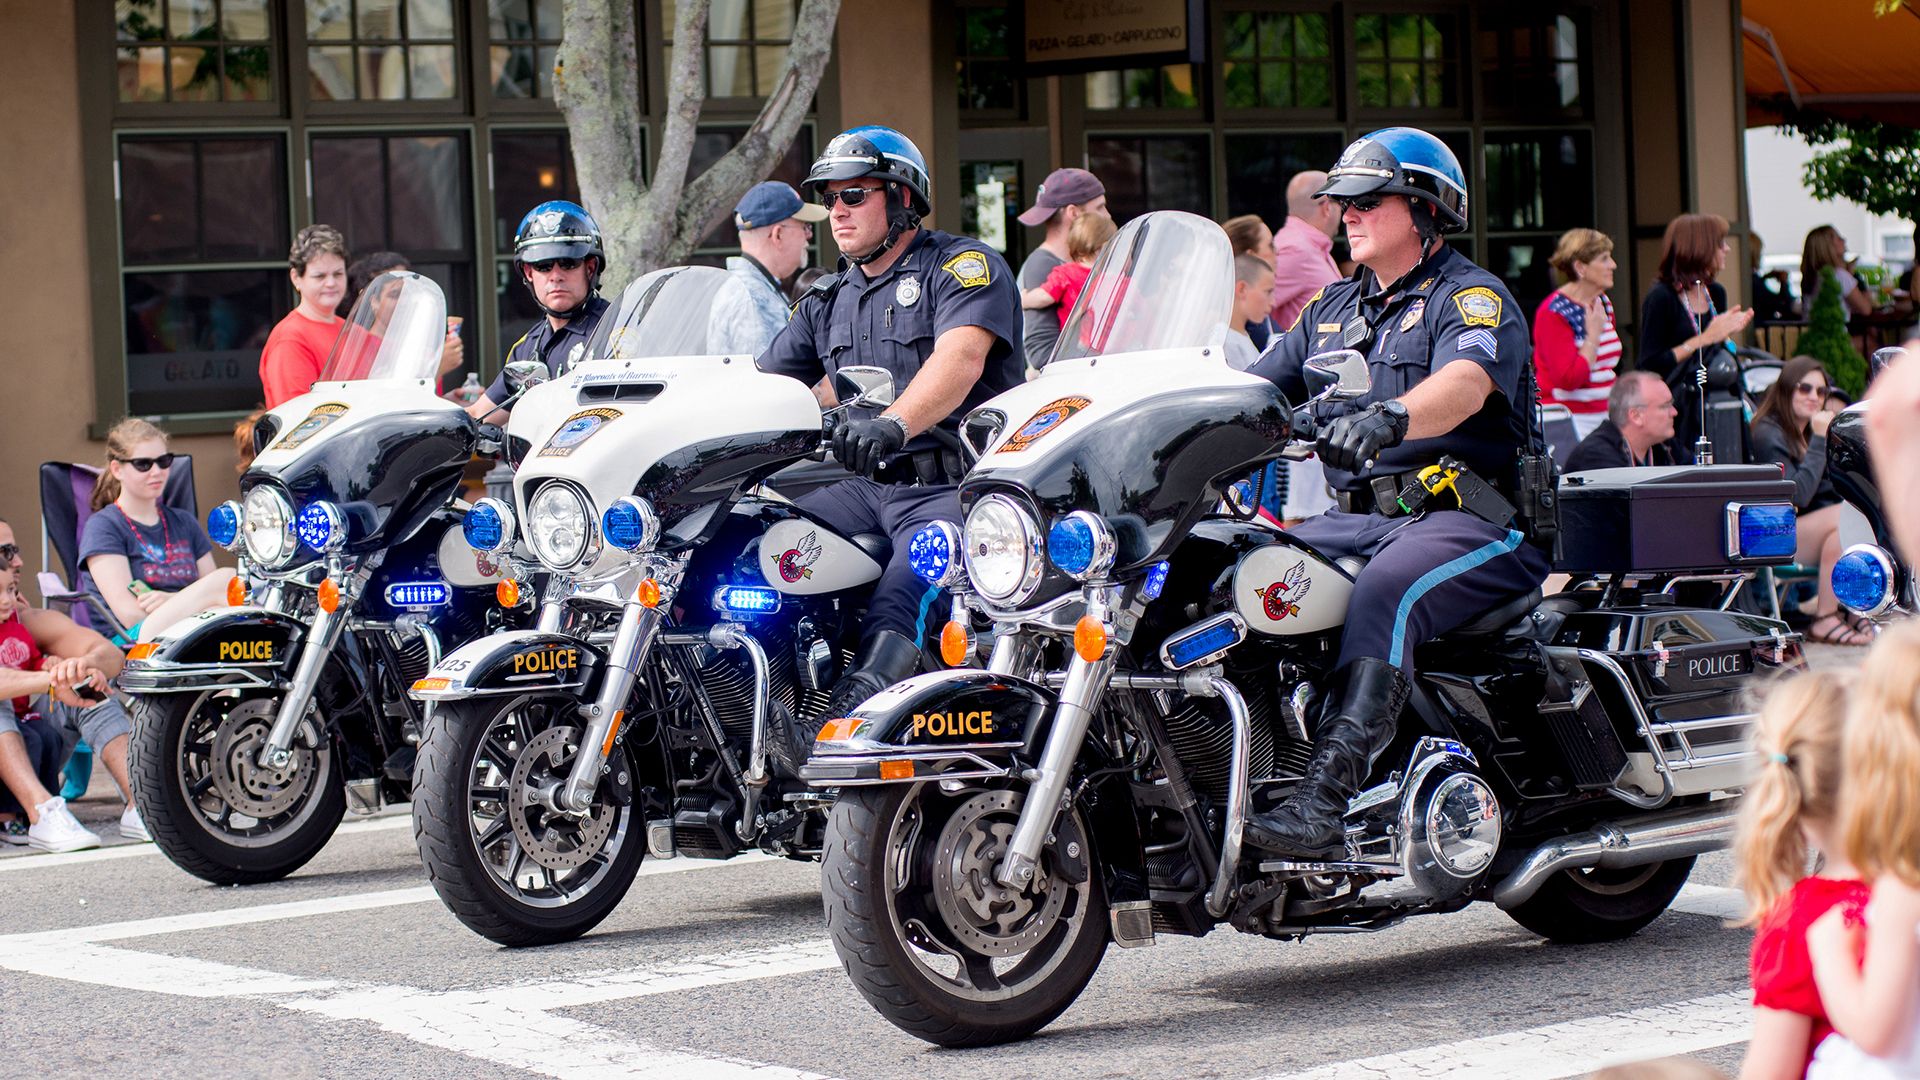 Police Motorcycles in a parade